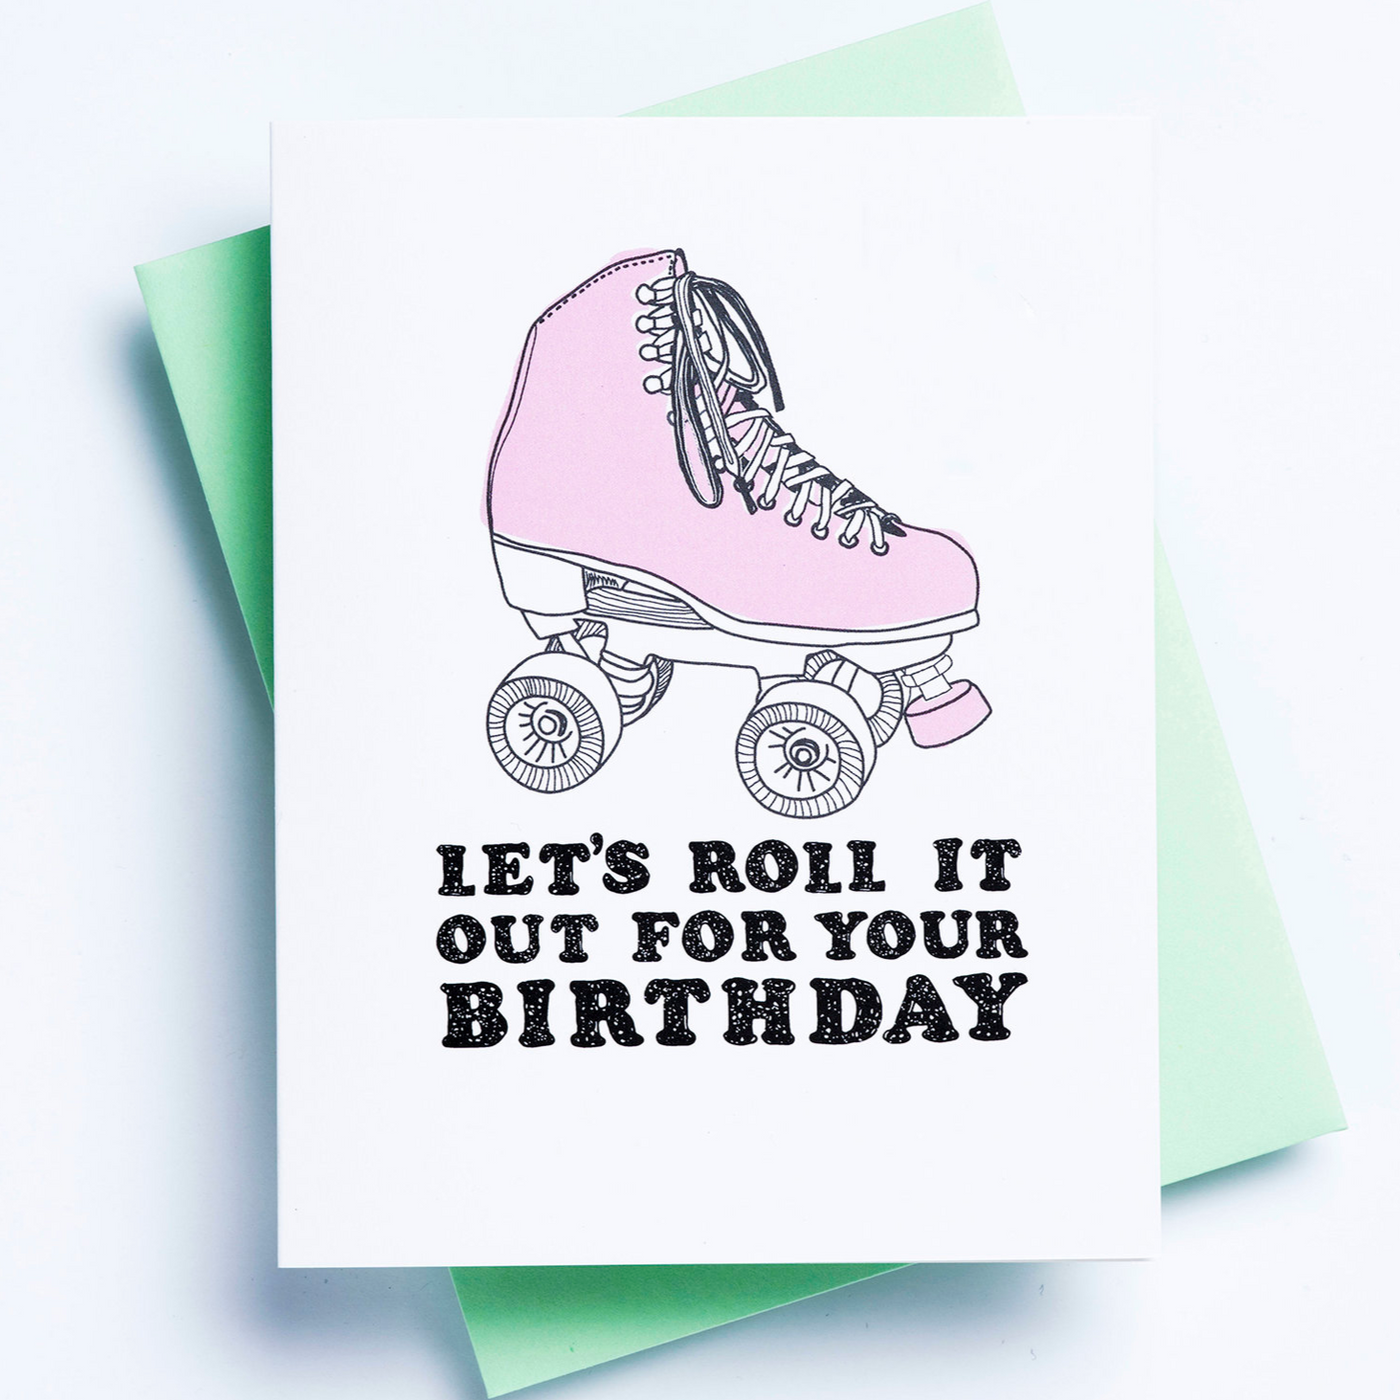 A white birthday card with an image of a roller skate and the words 'let's roll it out for your birthday' displayed over a green envelope and white background